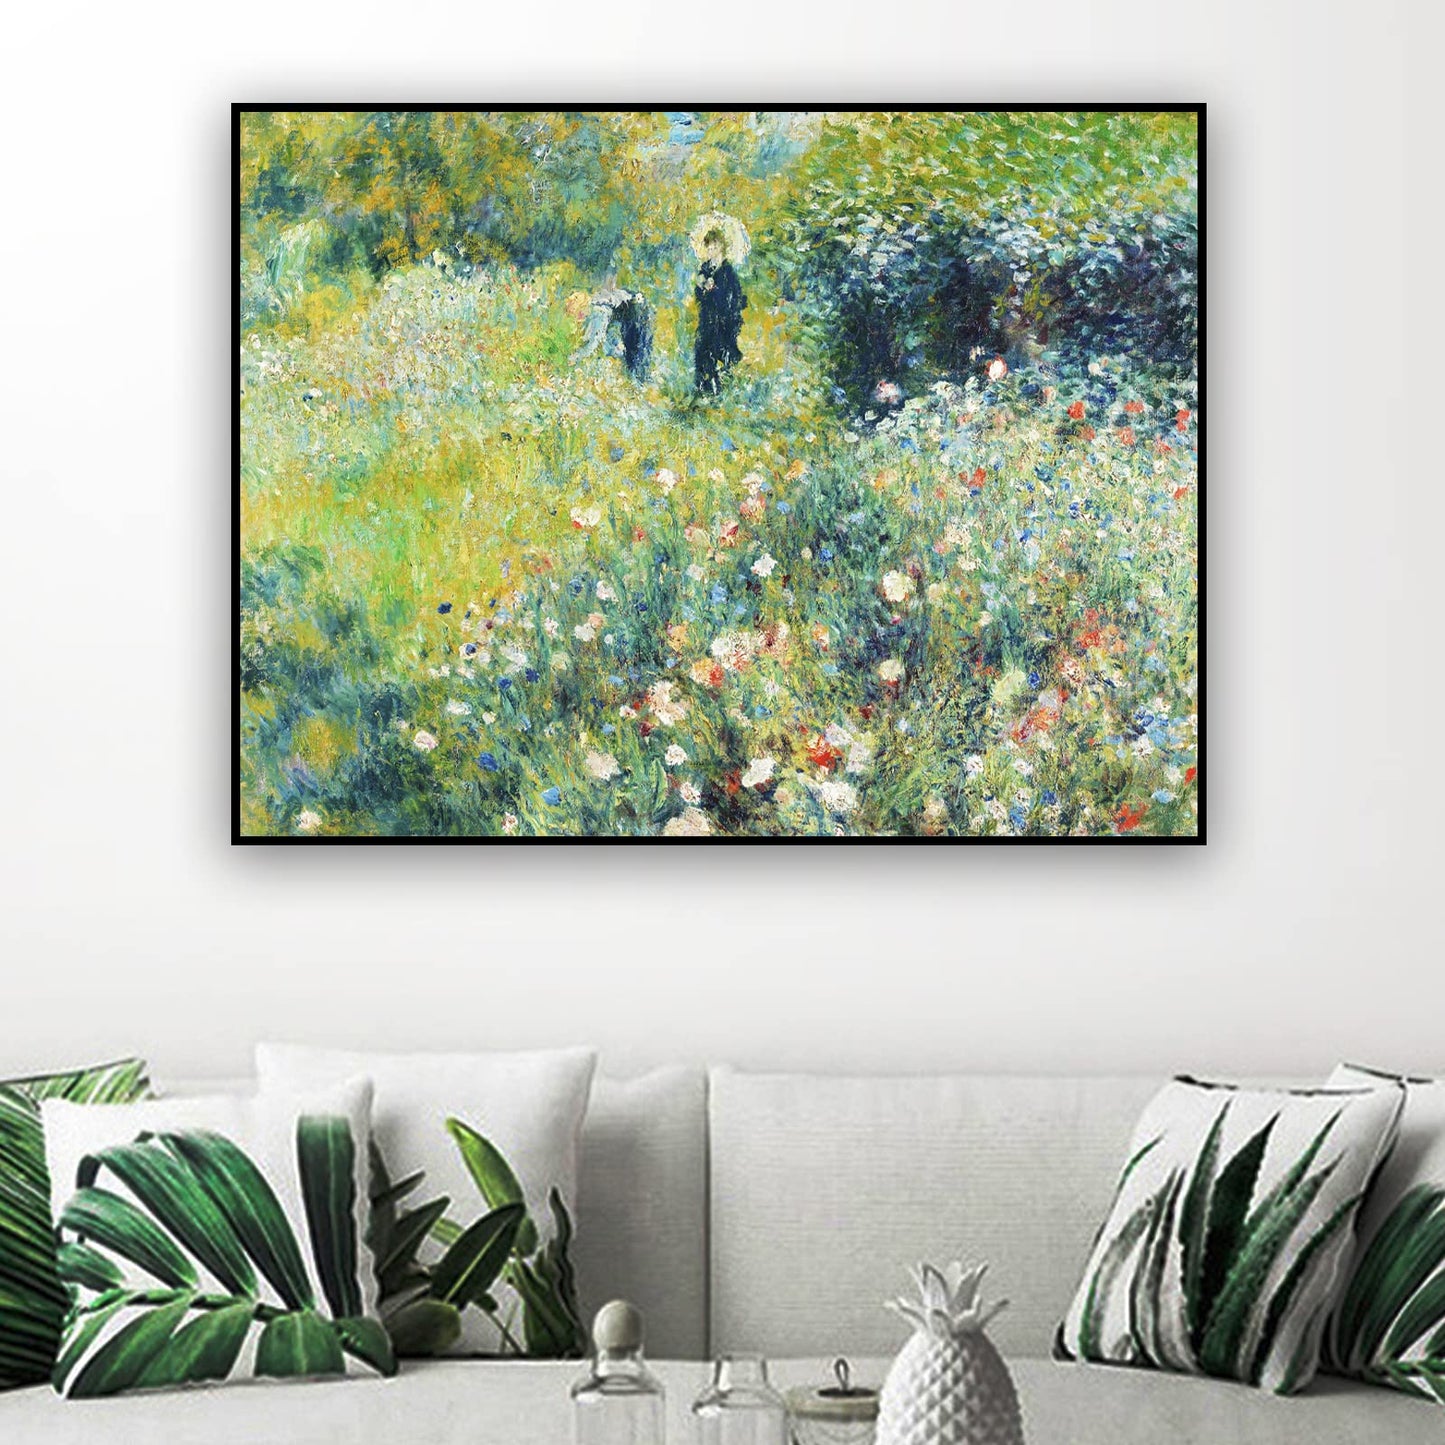 ZZPT Pierre Auguste Renoir Poster Print - Summer Landscape Canvas Wall Art - Oil Painting Reproduction Abstract Wall Decor for Living Room Office Unframed (12x16in/30x40cm)